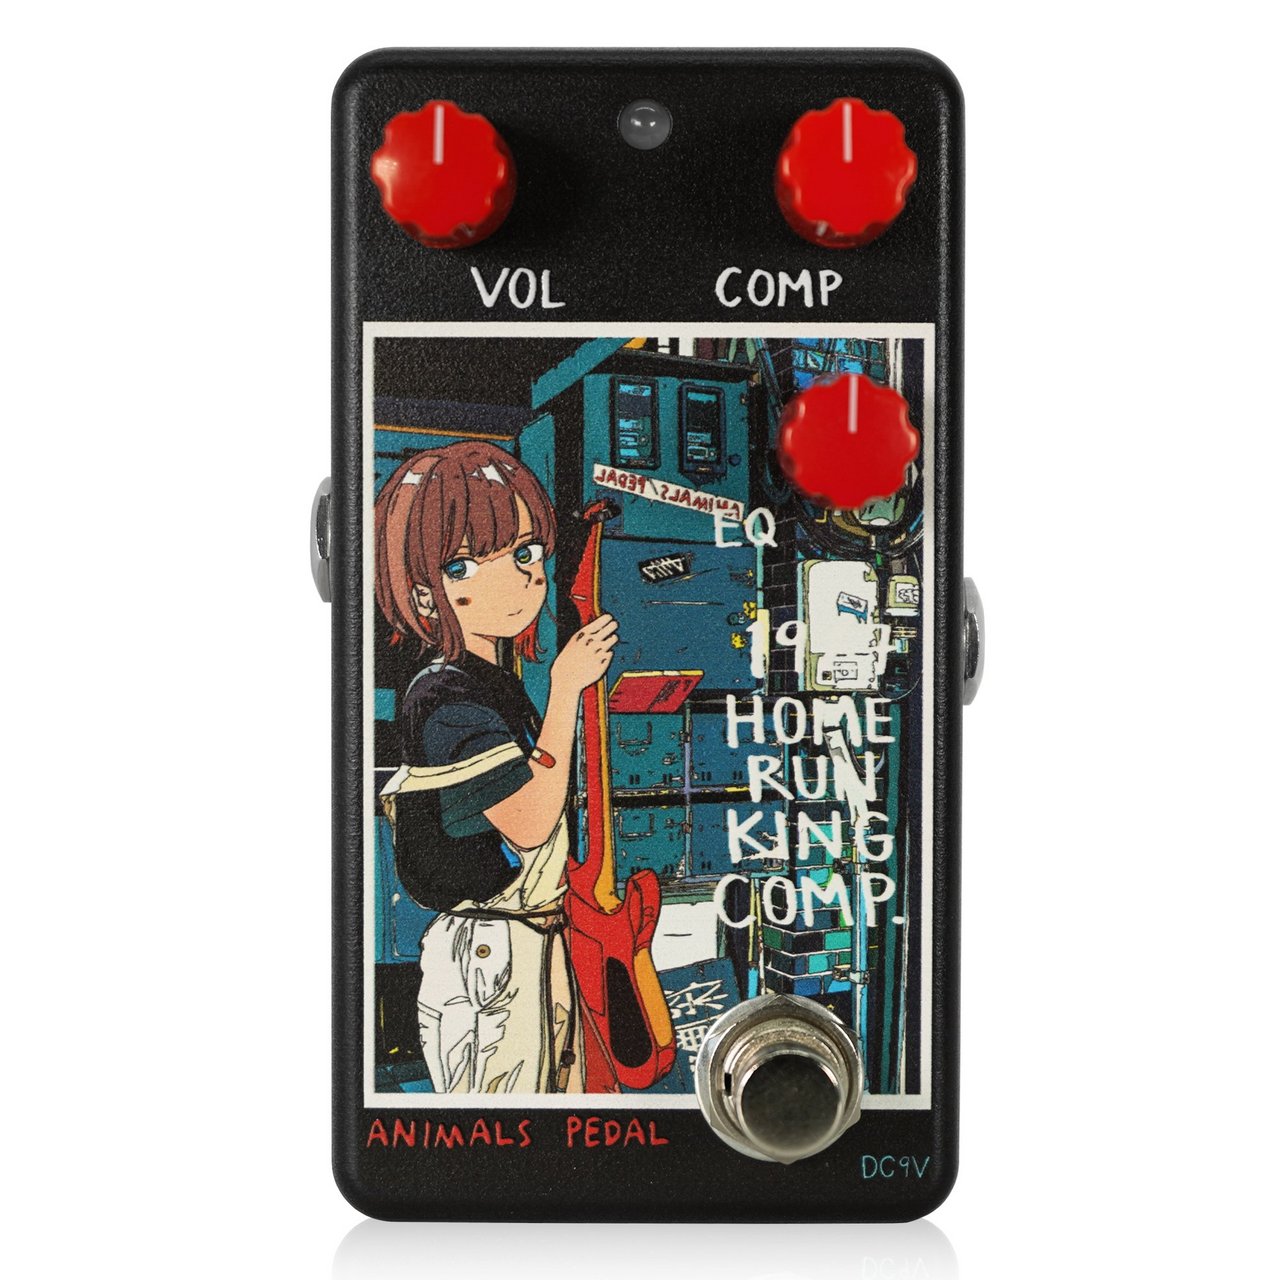 Animals Pedal Custom Illustrated 032 1927 Home Run King Comp. by 